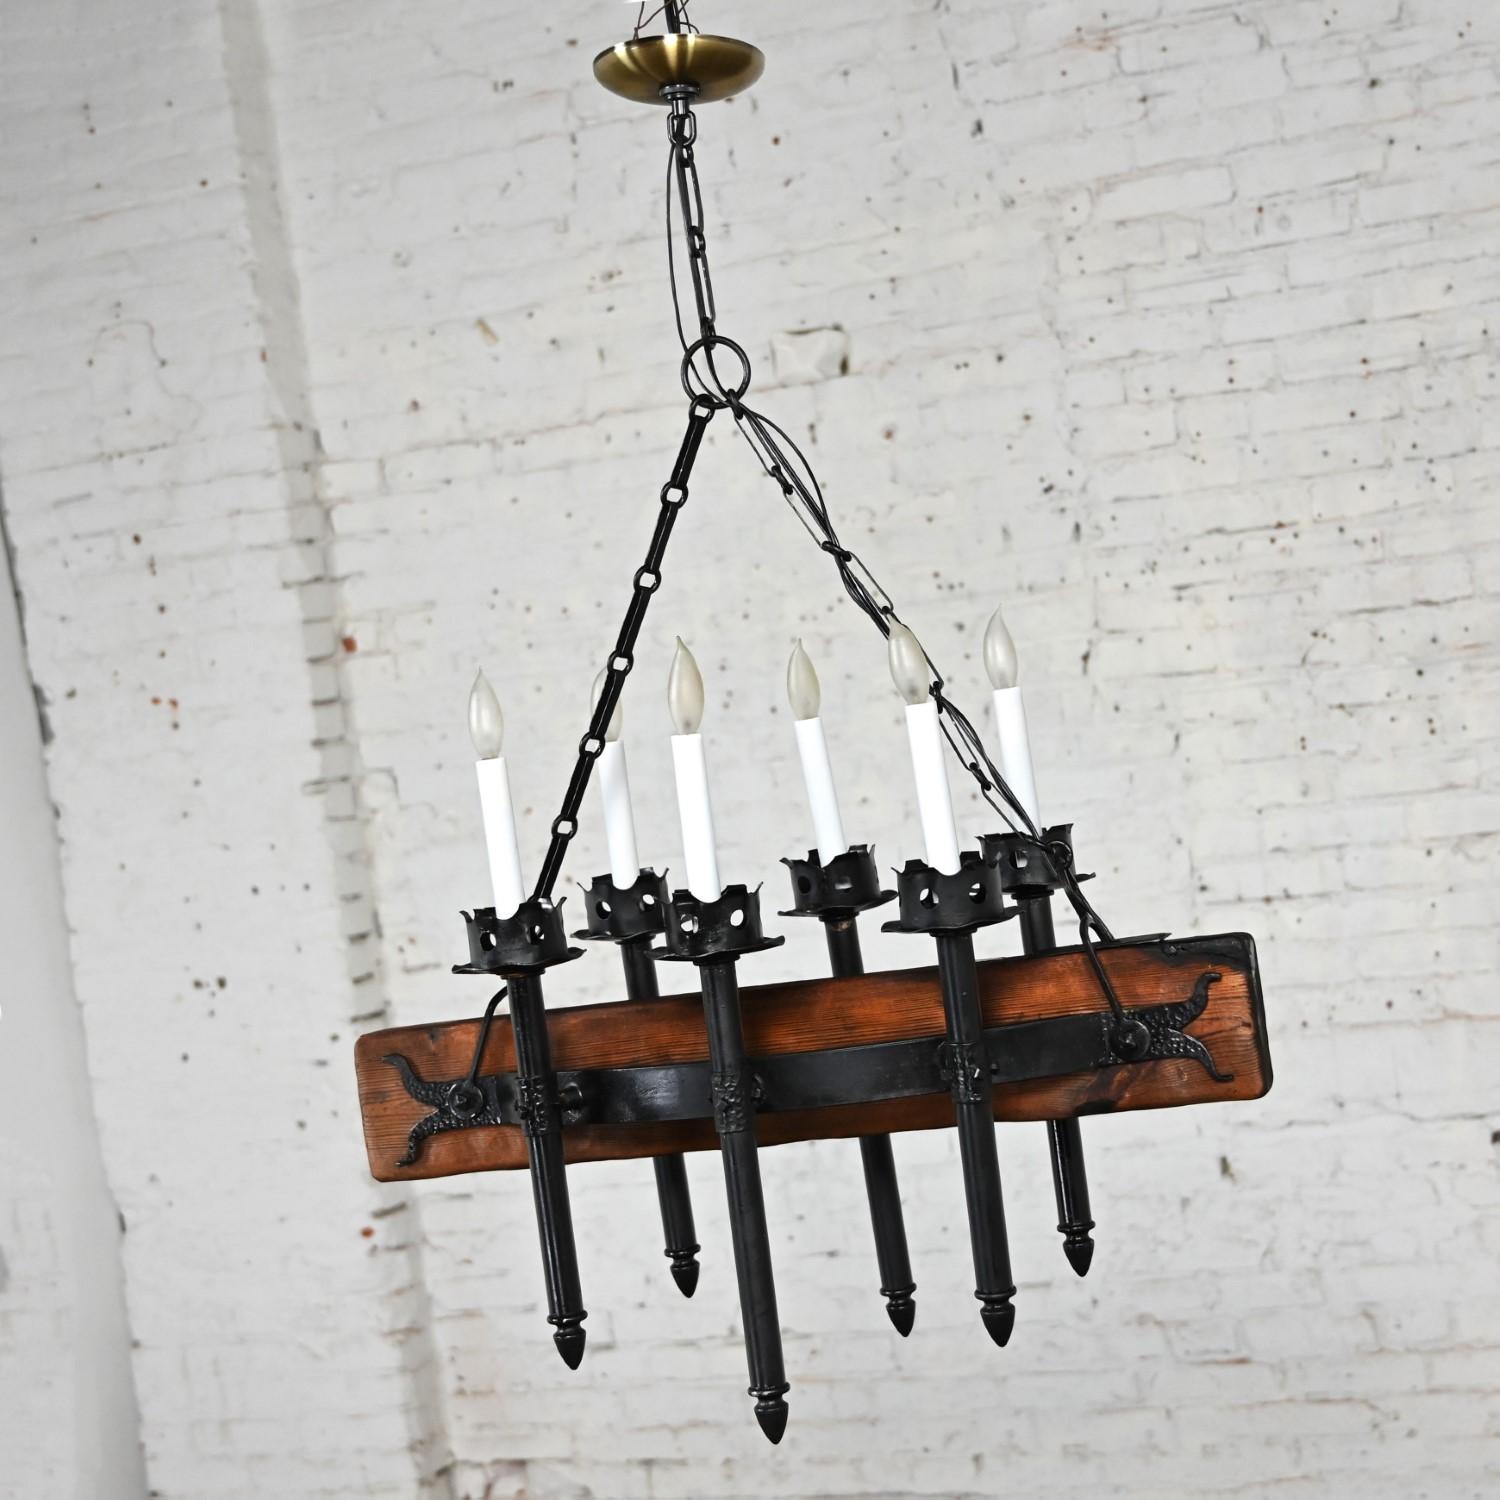 Medieval Gothic Spanish Revival Iron & Wood Beam Hanging Light Fixture Mexico For Sale 12